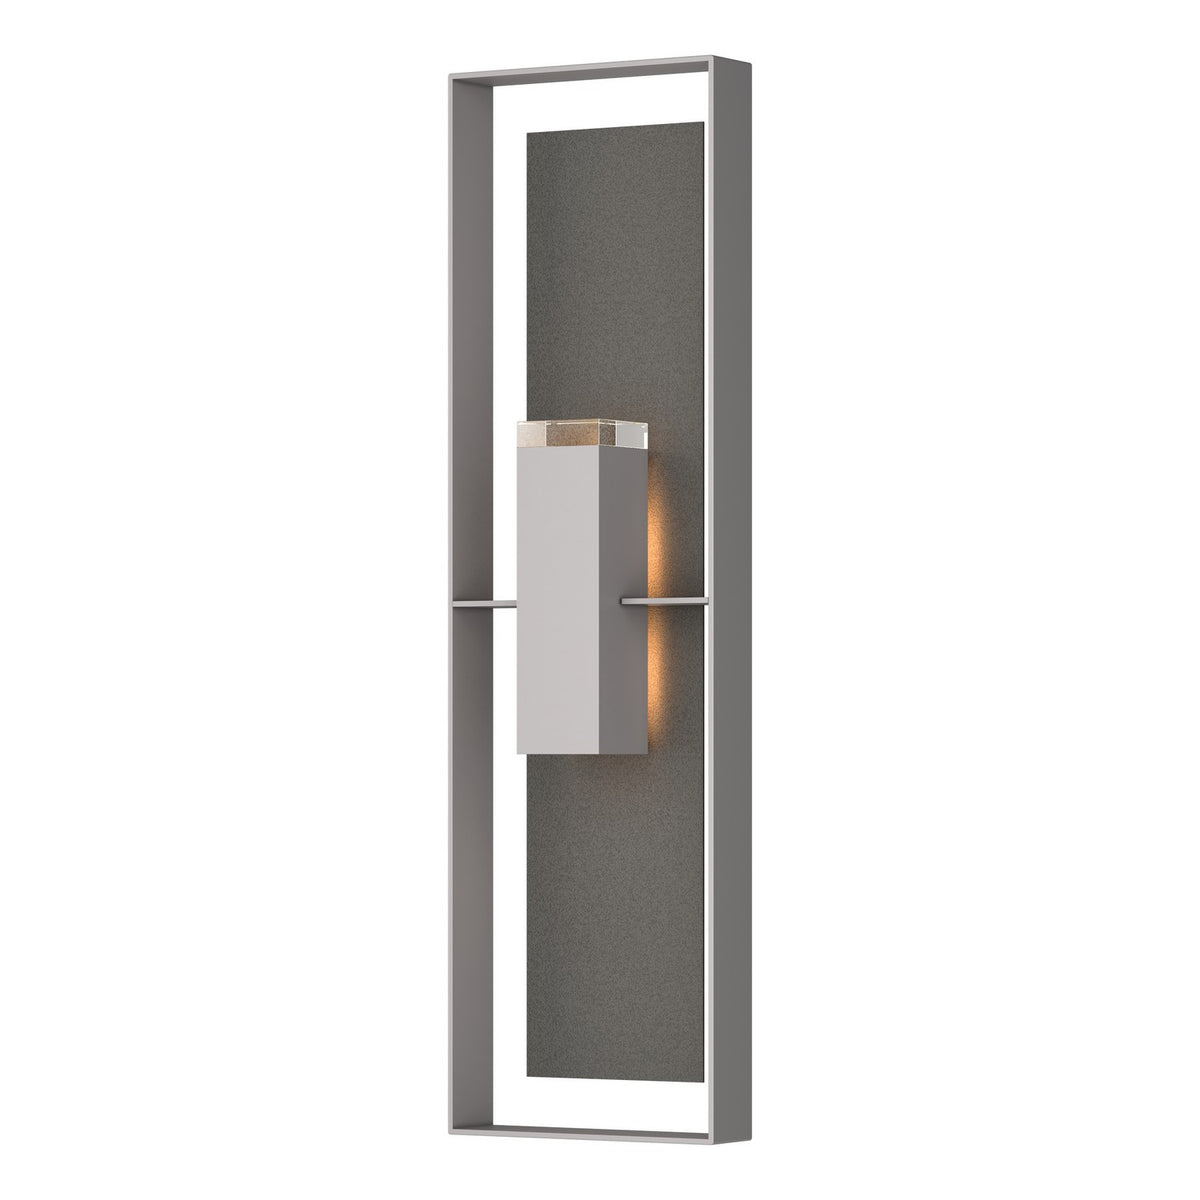 Hubbardton Forge - 302608-SKT-78-20-ZM0736 - Two Light Outdoor Wall Sconce - Shadow Box - Coastal Burnished Steel